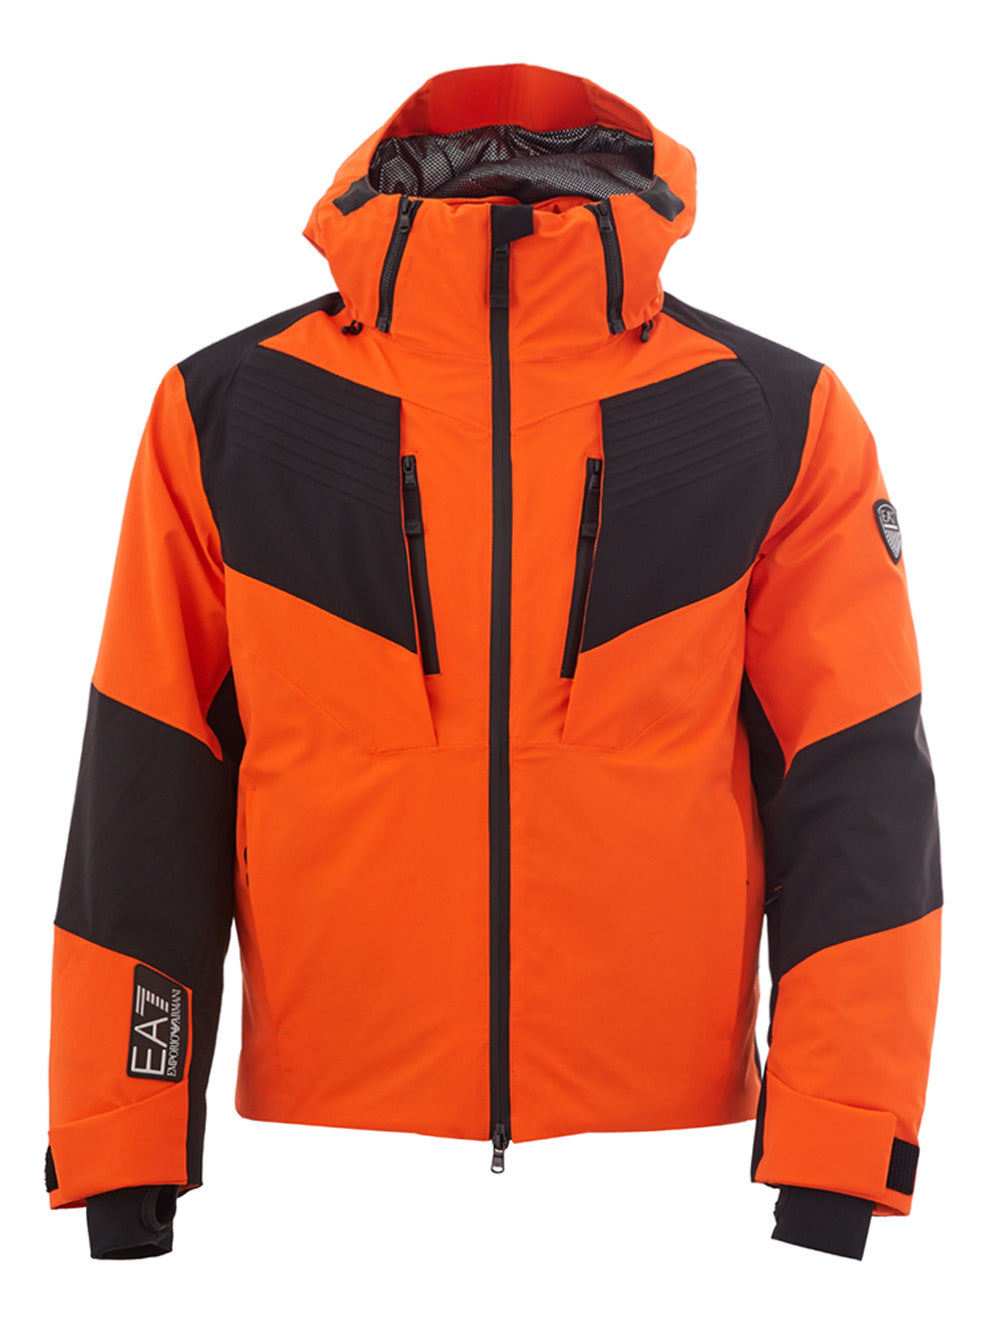 Neon Orange Quilted Technical Jacket